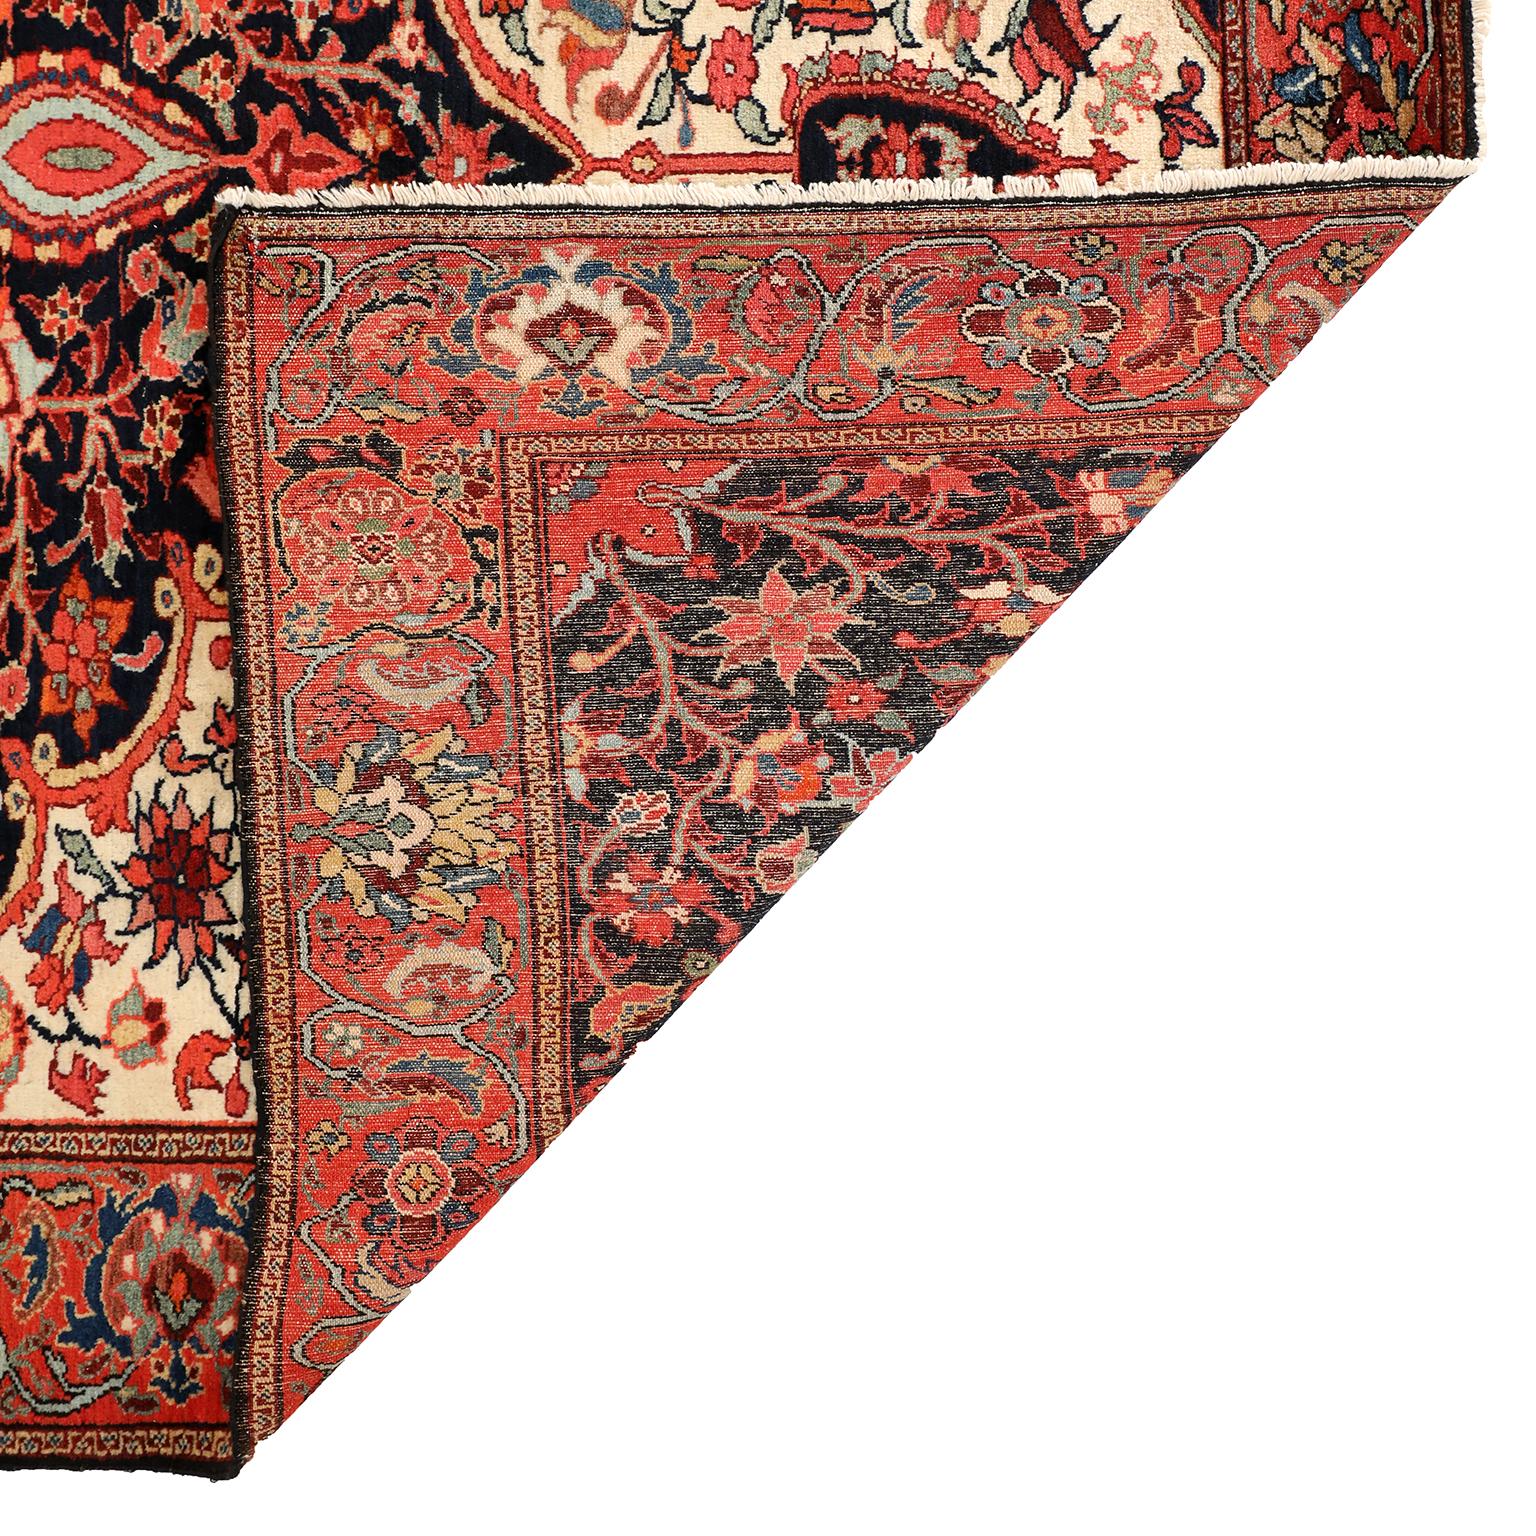 Antique 1900s Wool Persian Meeshan Malayer Rug, 4' x 6' In Good Condition For Sale In New York, NY